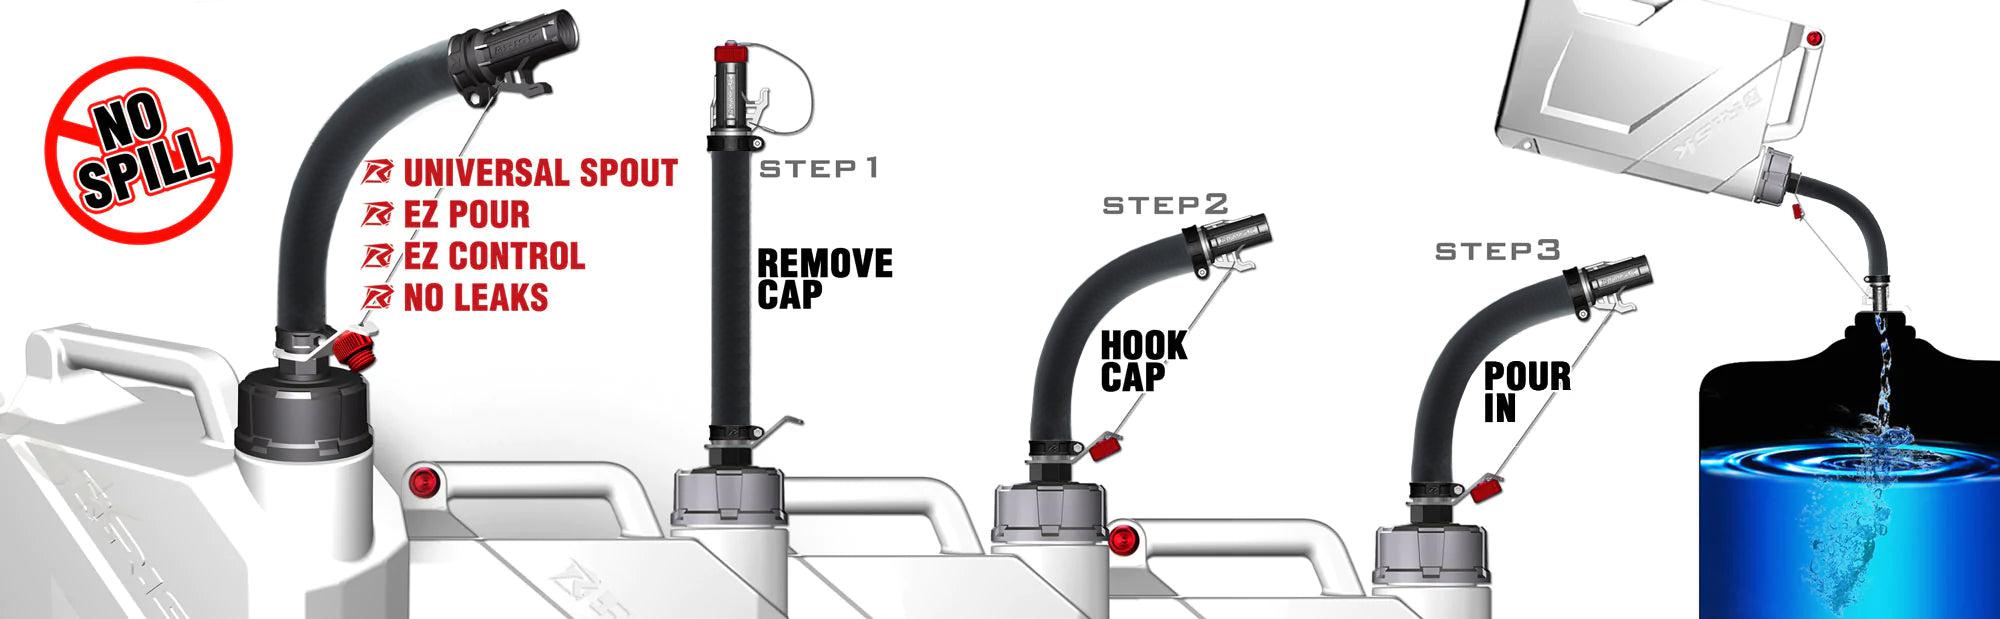 Using the Hose Bender banner featuring 3 steps and lots of graphics explaining how to use the EZ jug. text reads: universal spout, ez pour, ez control, no leaks. step 1, remove cap. step 2, hook cap. step 3, pour in.